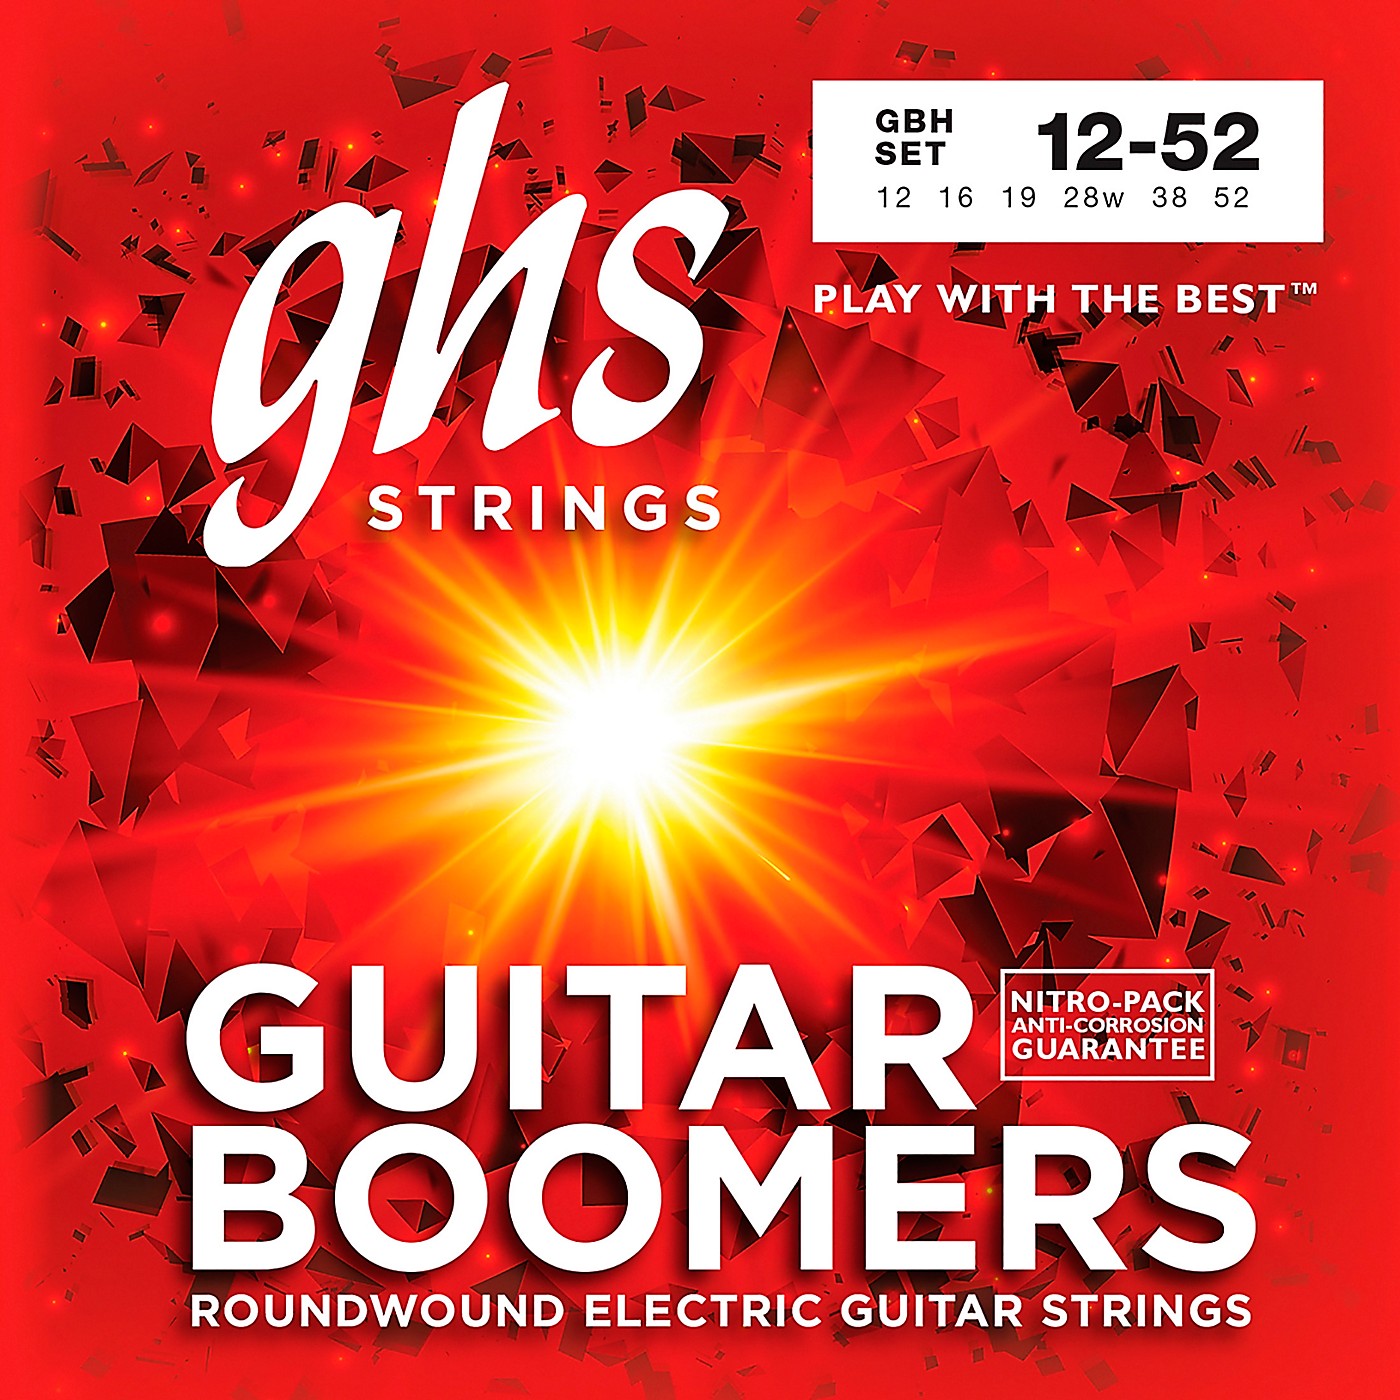 GHS GBH Boomers Heavy Electric Guitar Strings thumbnail